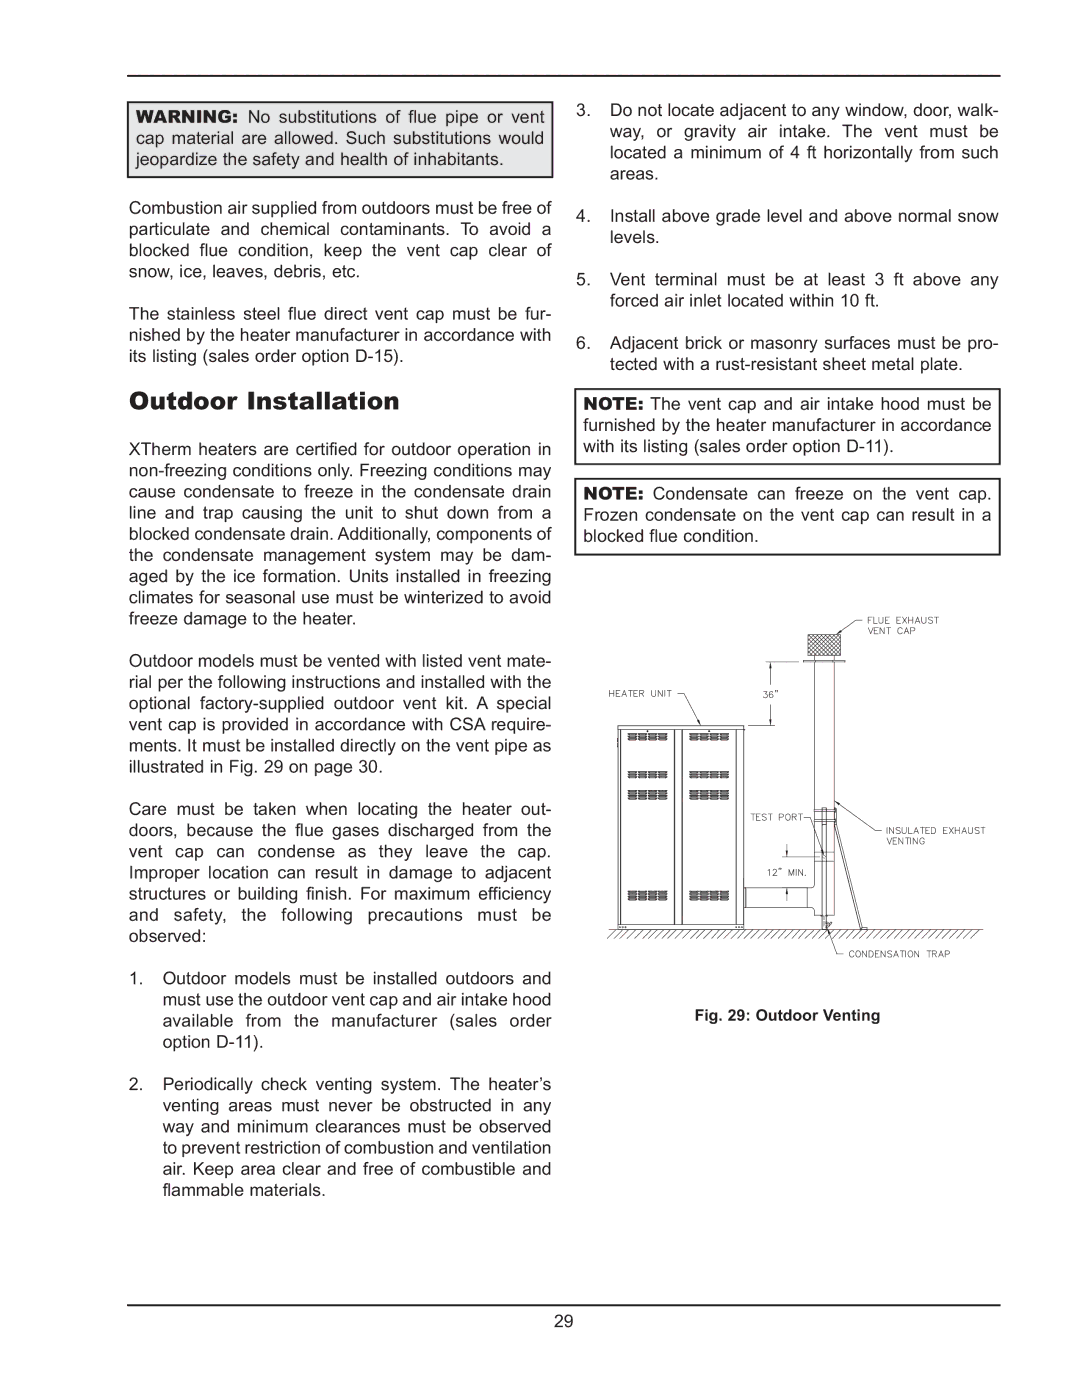 Raypak 1005 operating instructions Outdoor Installation, Outdoor Venting 